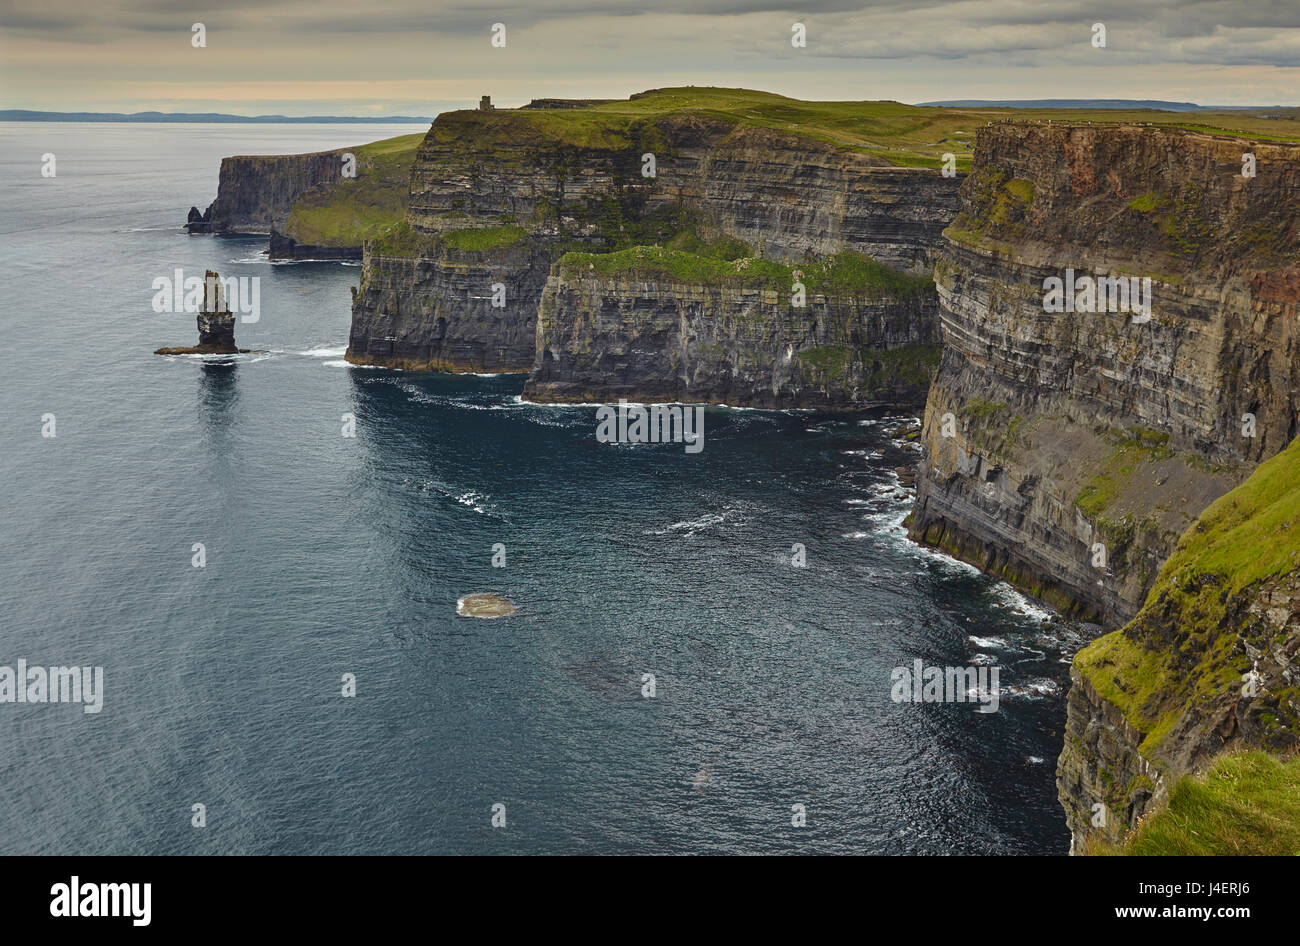 The Cliffs of Moher, near Lahinch, County Clare, Munster, Republic of Ireland, Europe Stock Photo